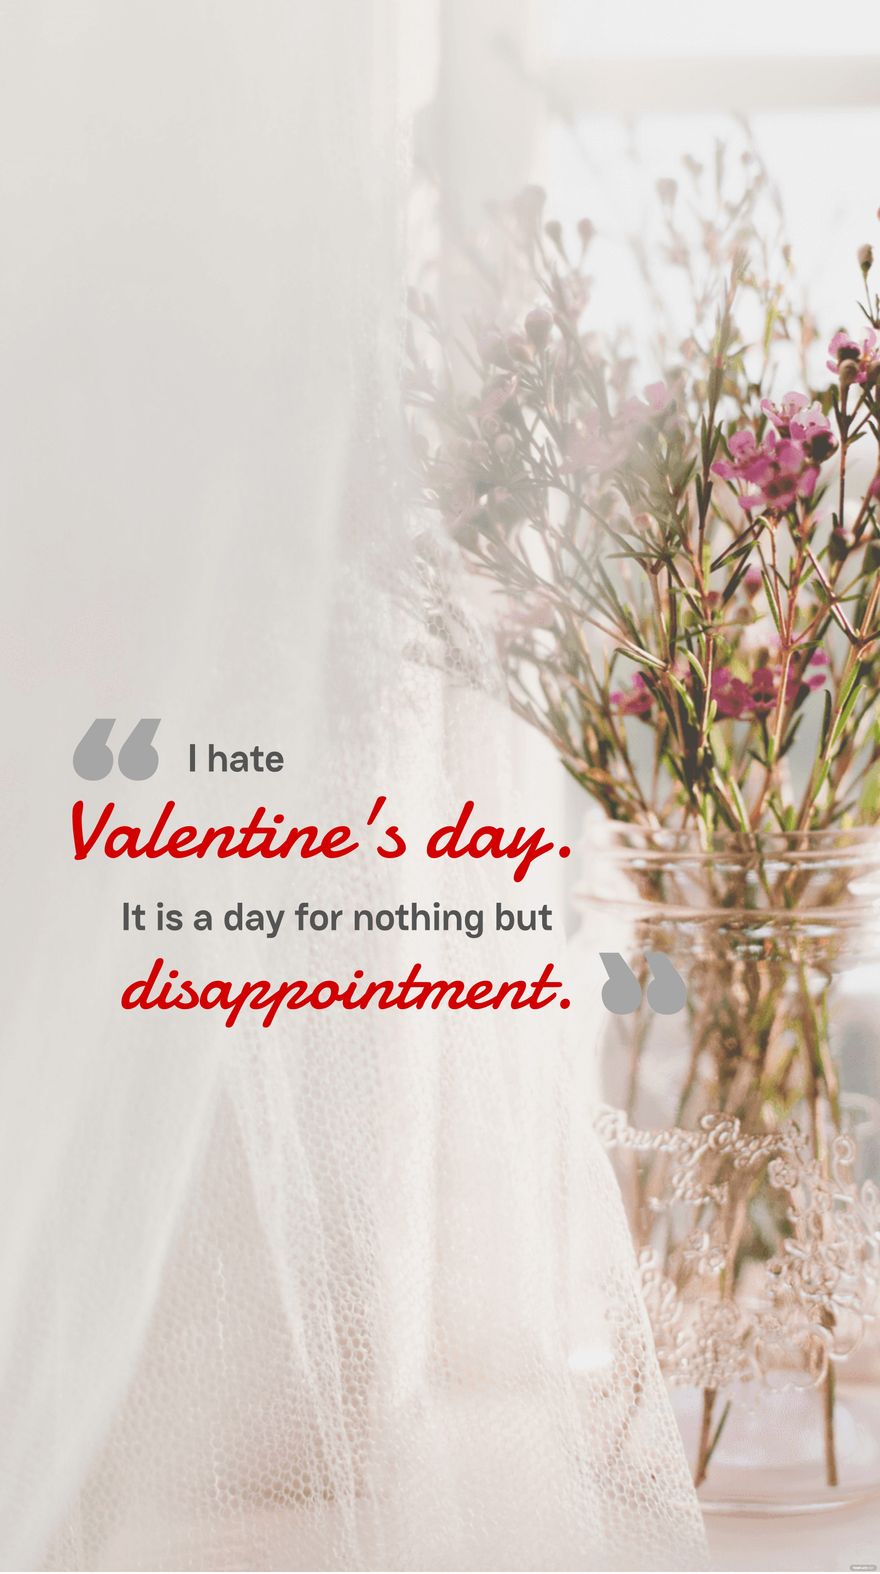 Free Larisa Oleynik - I hate Valentine's day. It is a day for nothing but disappointment. in JPEG